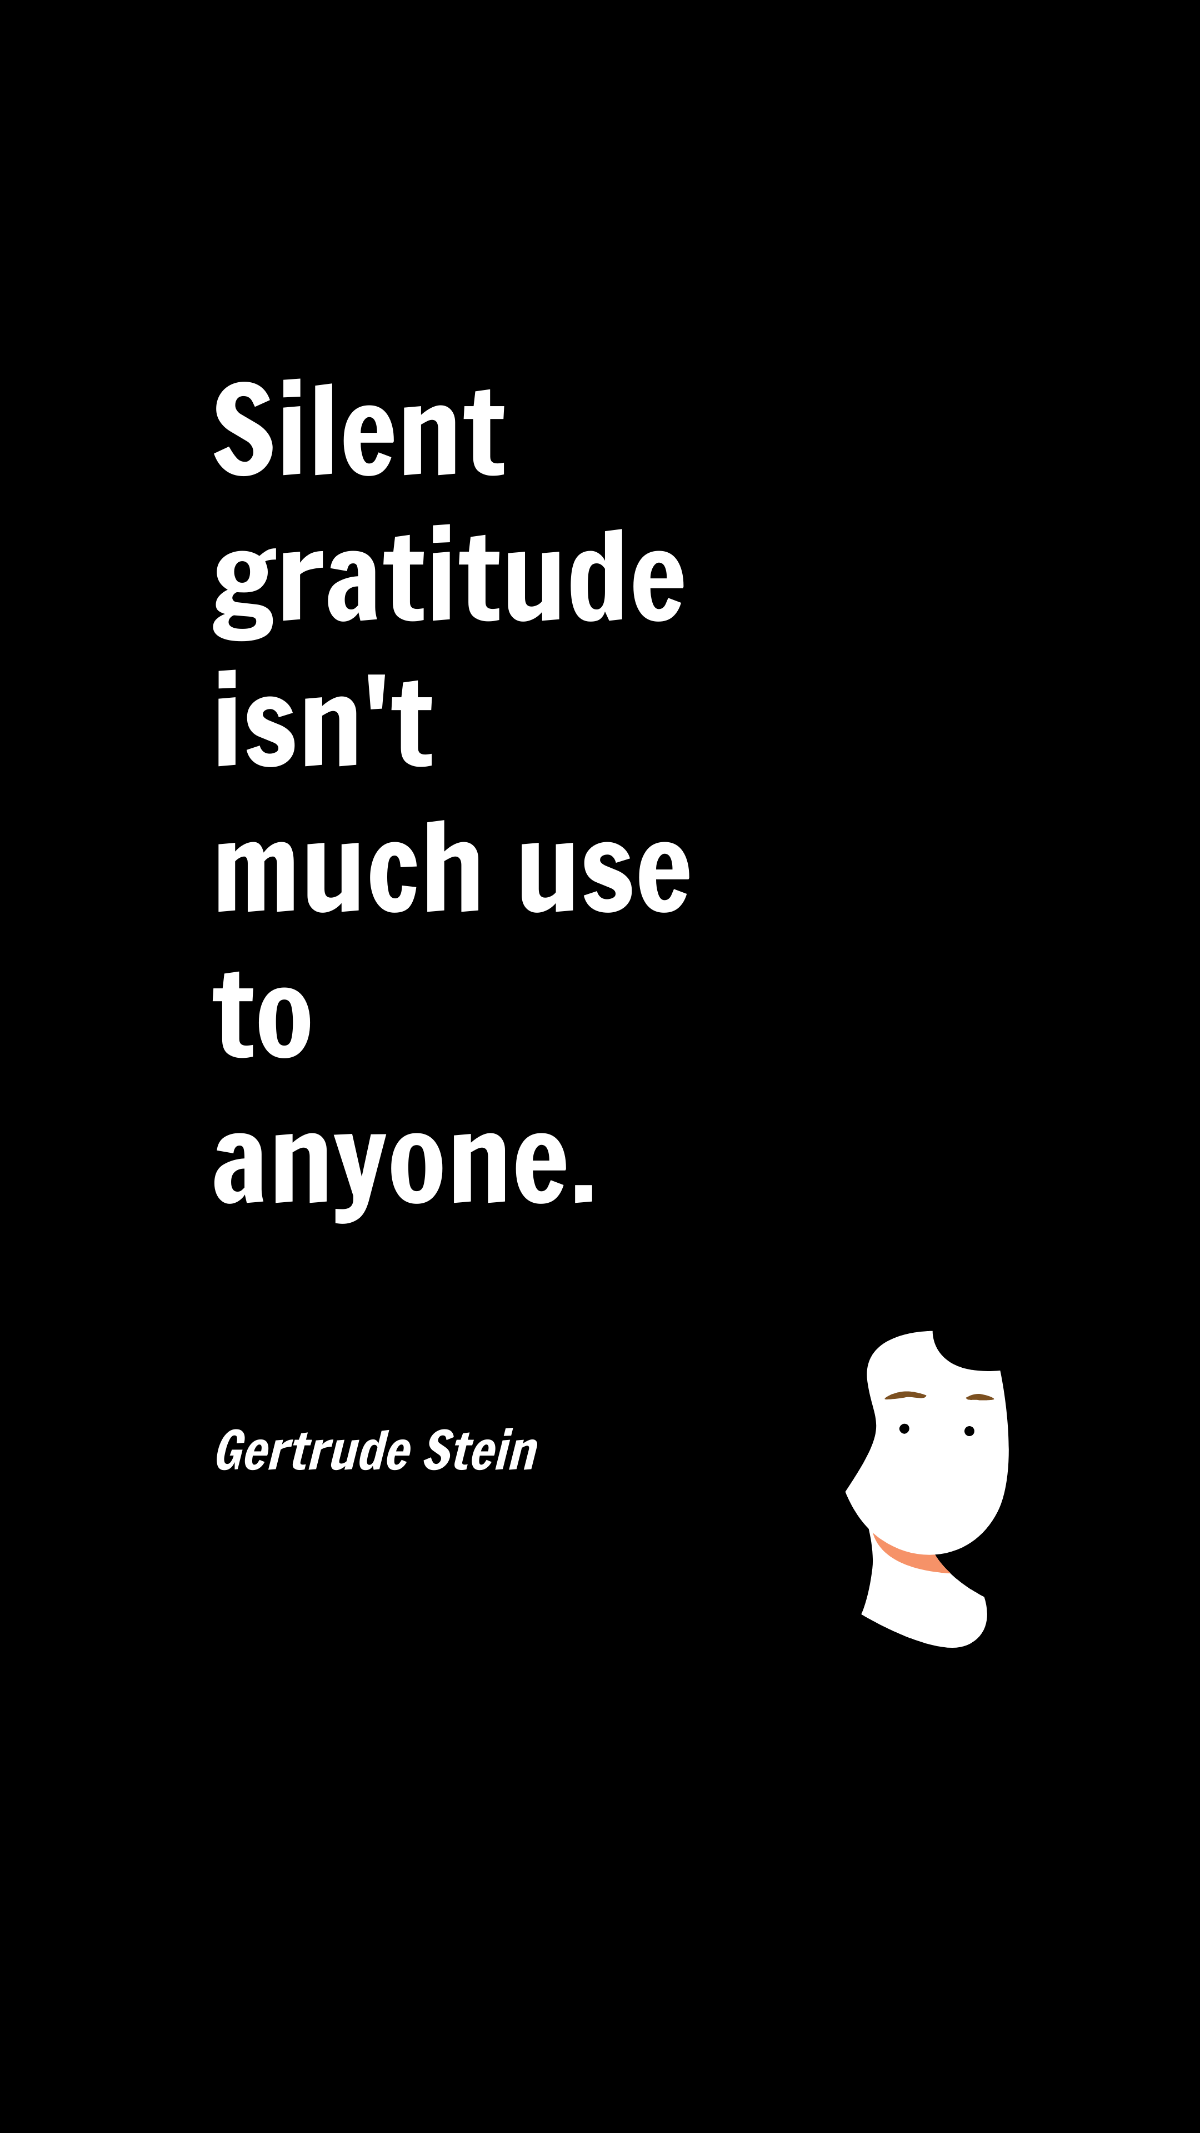 Gertrude Stein - Silent gratitude isn't much use to anyone.